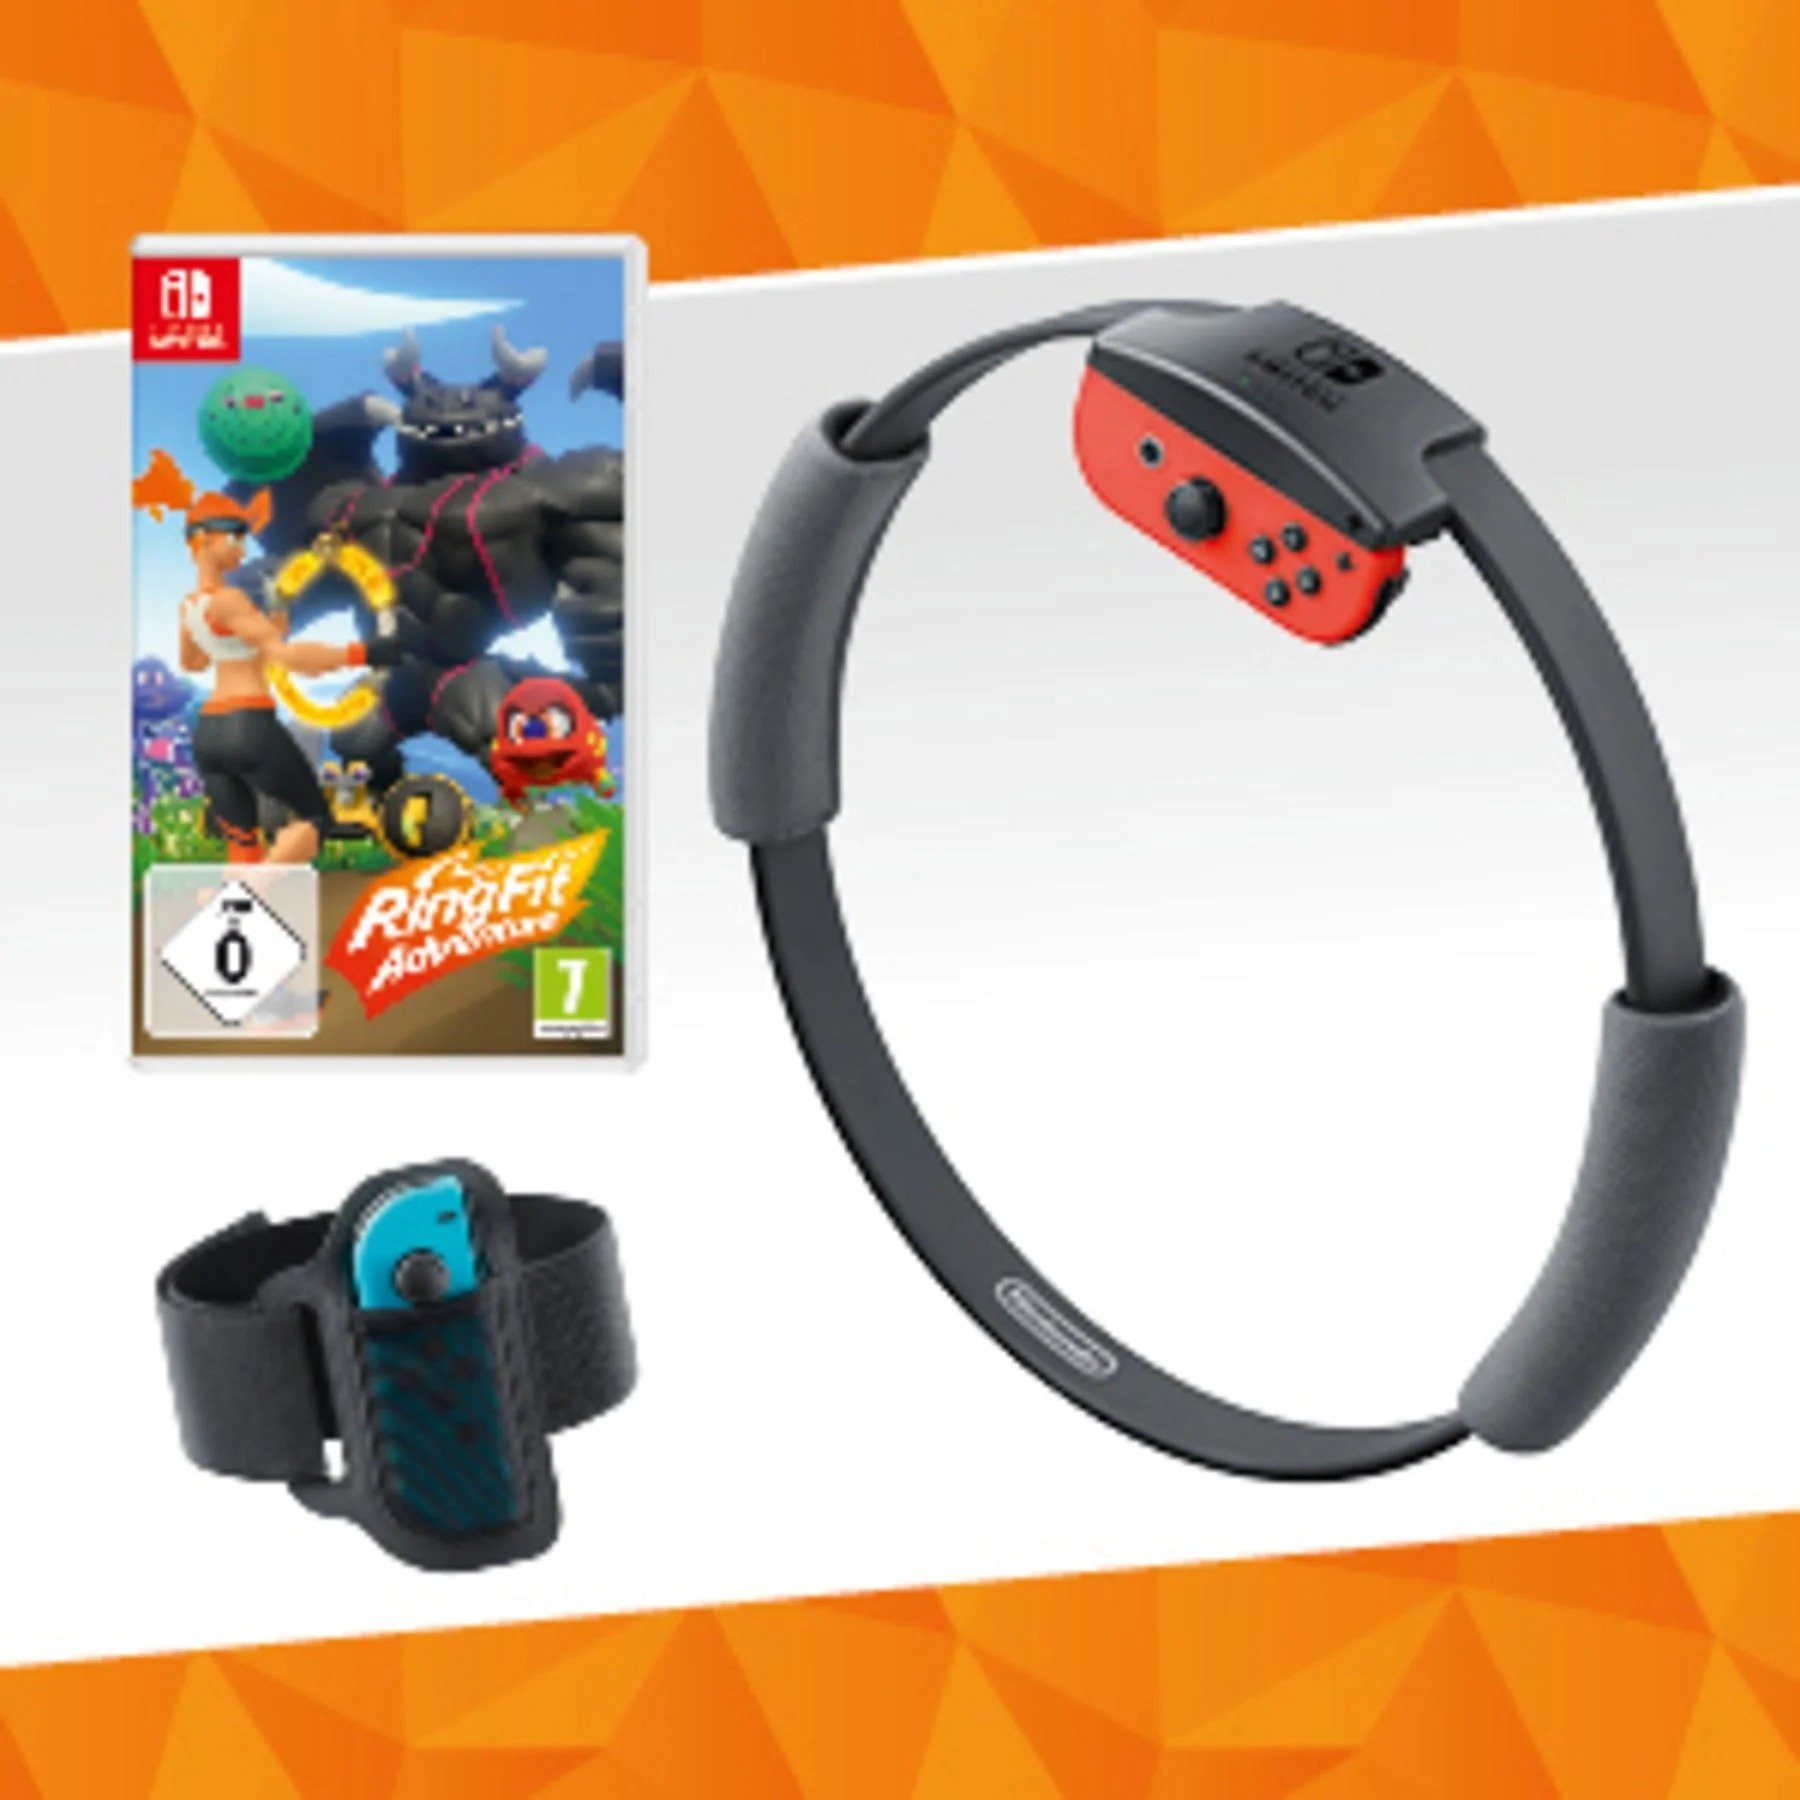 Nintendo Switch Ring-Con & Ring Beingurt Adventure Fit Spiel. Switch-Controller inkl